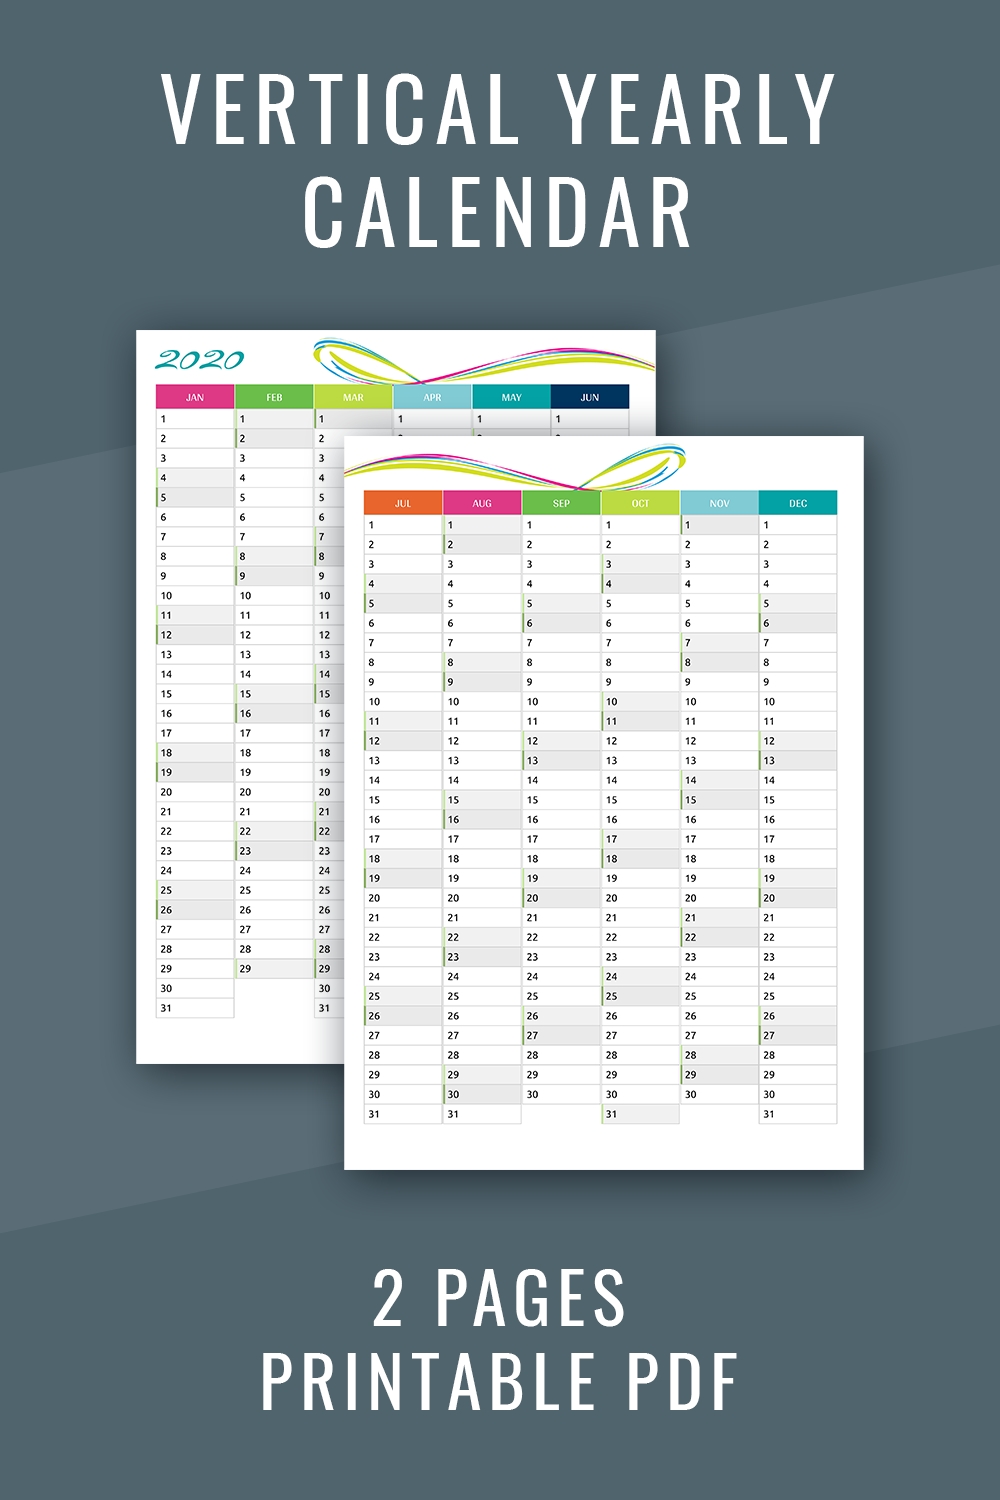 Vertical Yearly Calendar 2019-2020 | Year On Two Pages inside 2019 2020 Calendar Space To Write